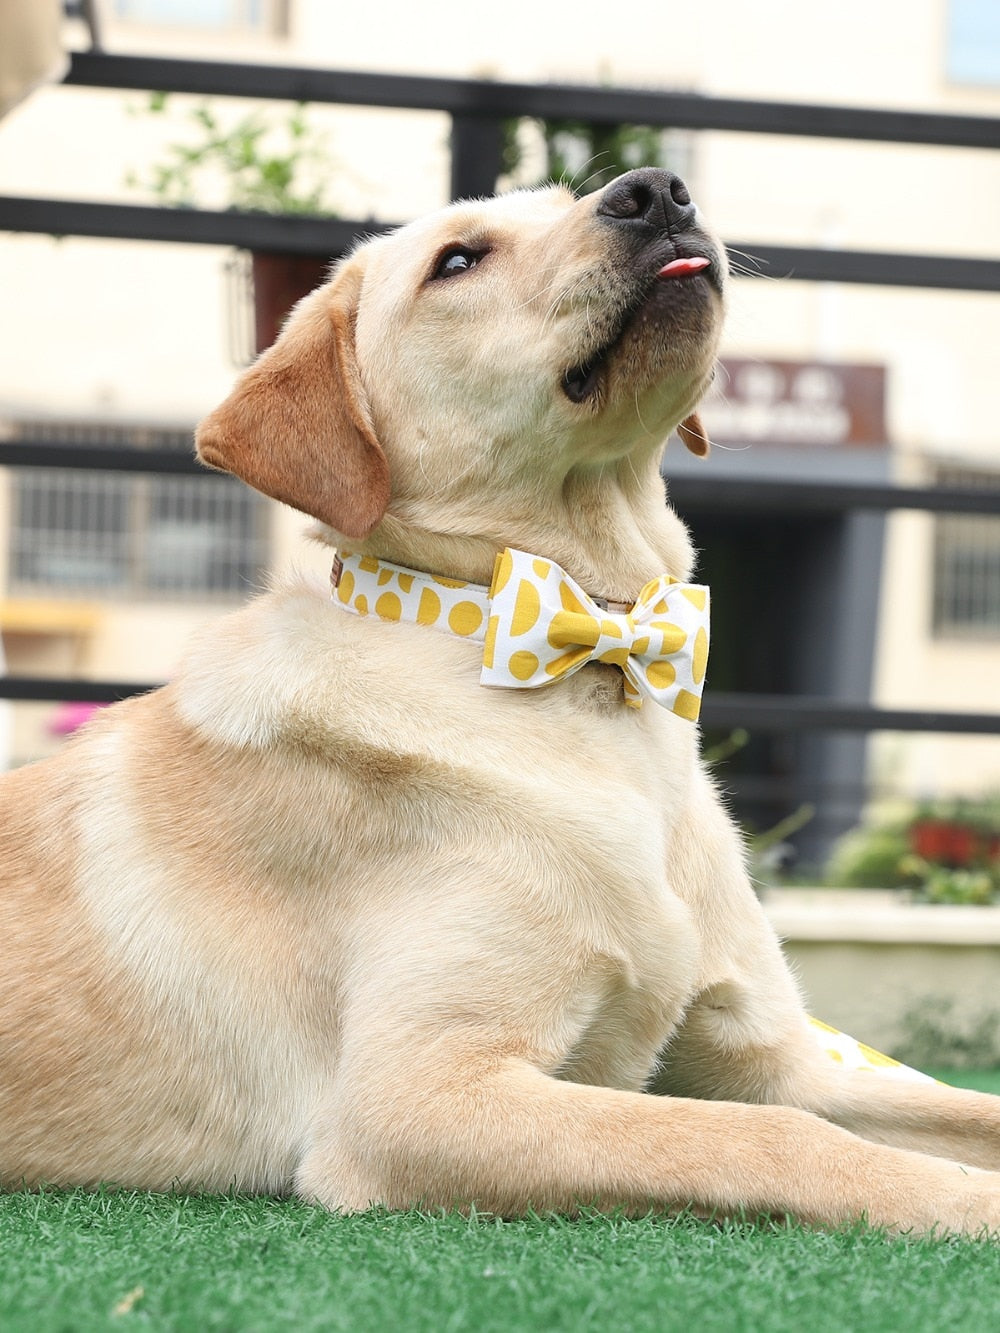 The Lemon Yellow Dog Collar with Bow Tie Plastic Buckle